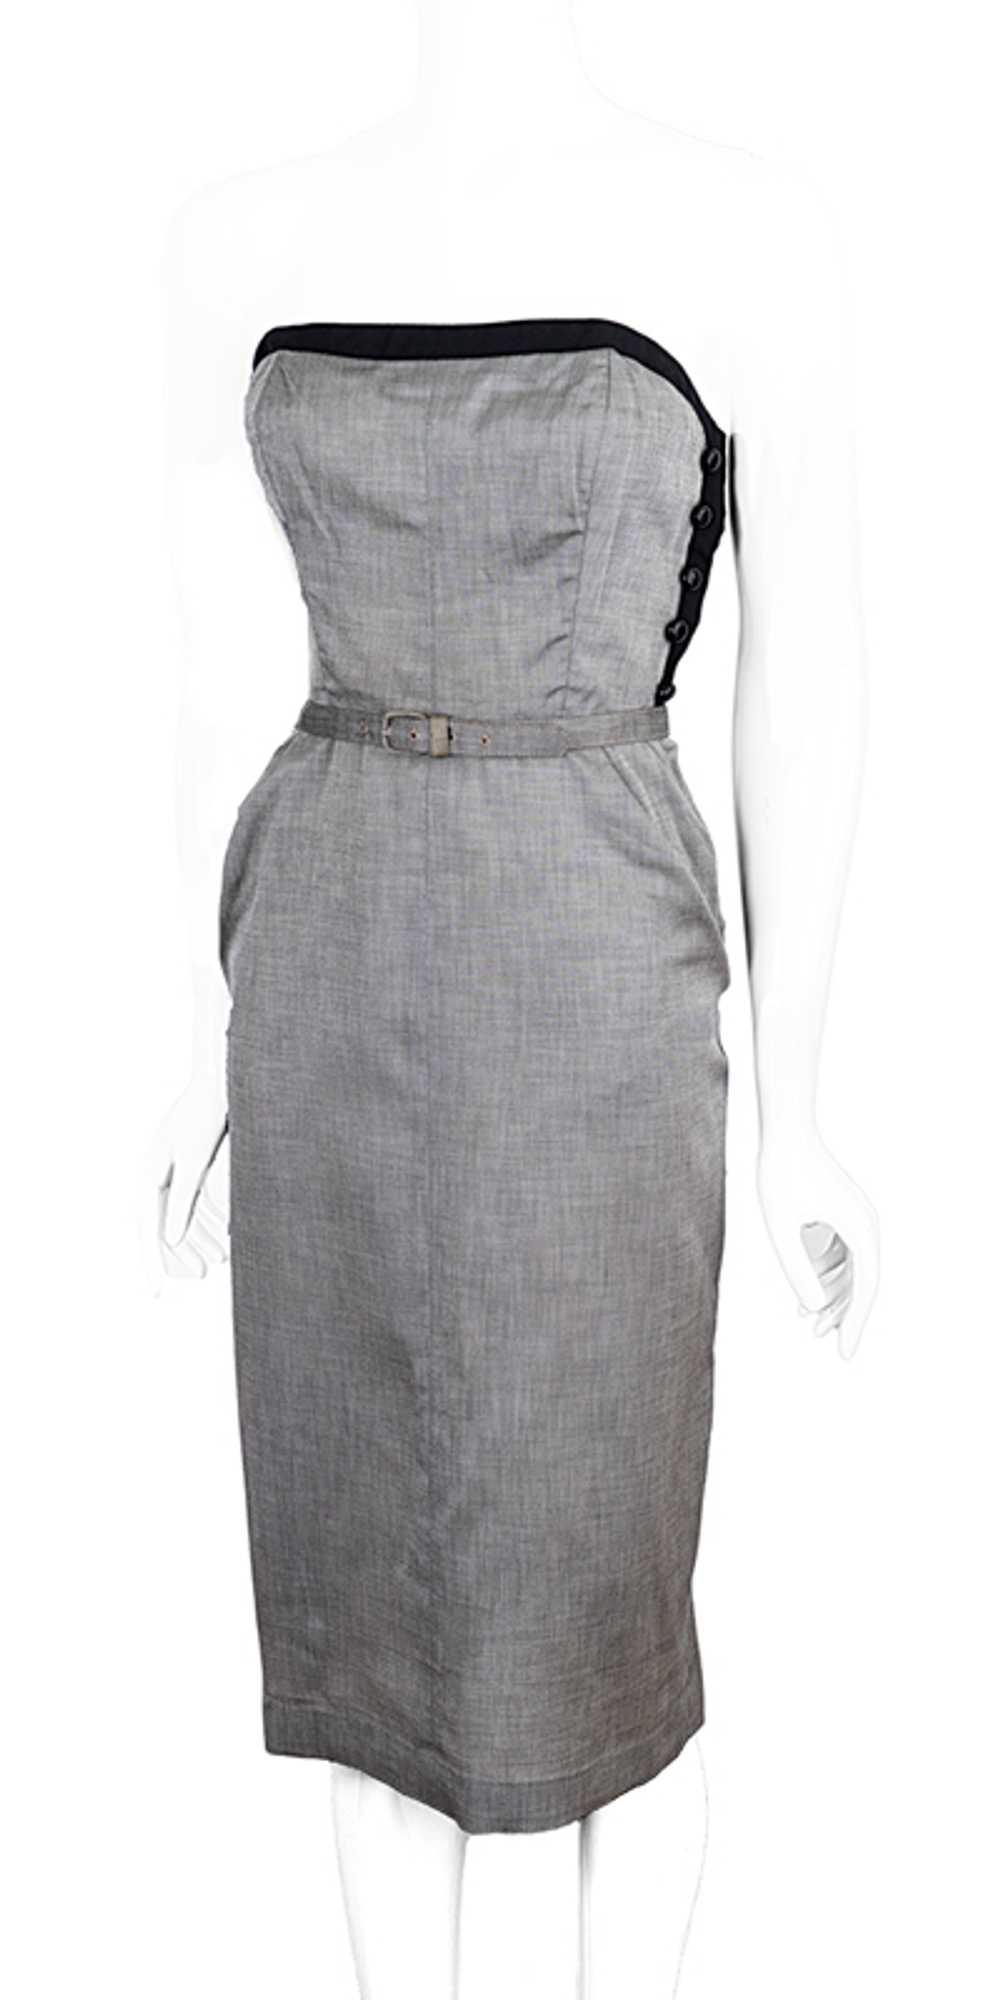 1950s Strapless Dress with Jacket - image 3